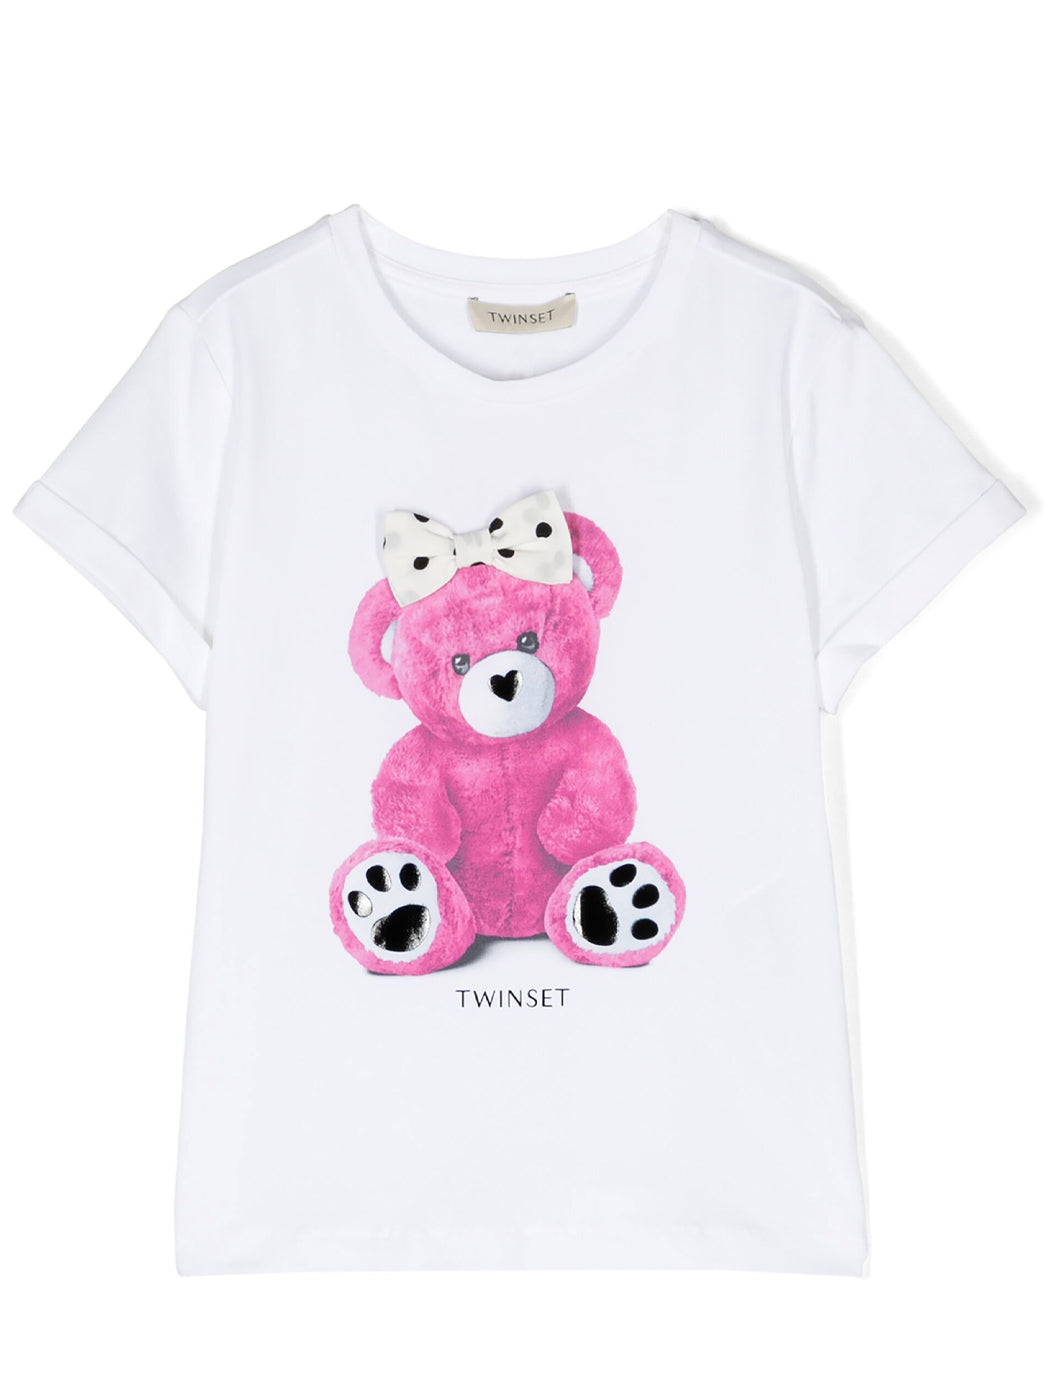 Twinset T-shirt with bow and teddy bear-print